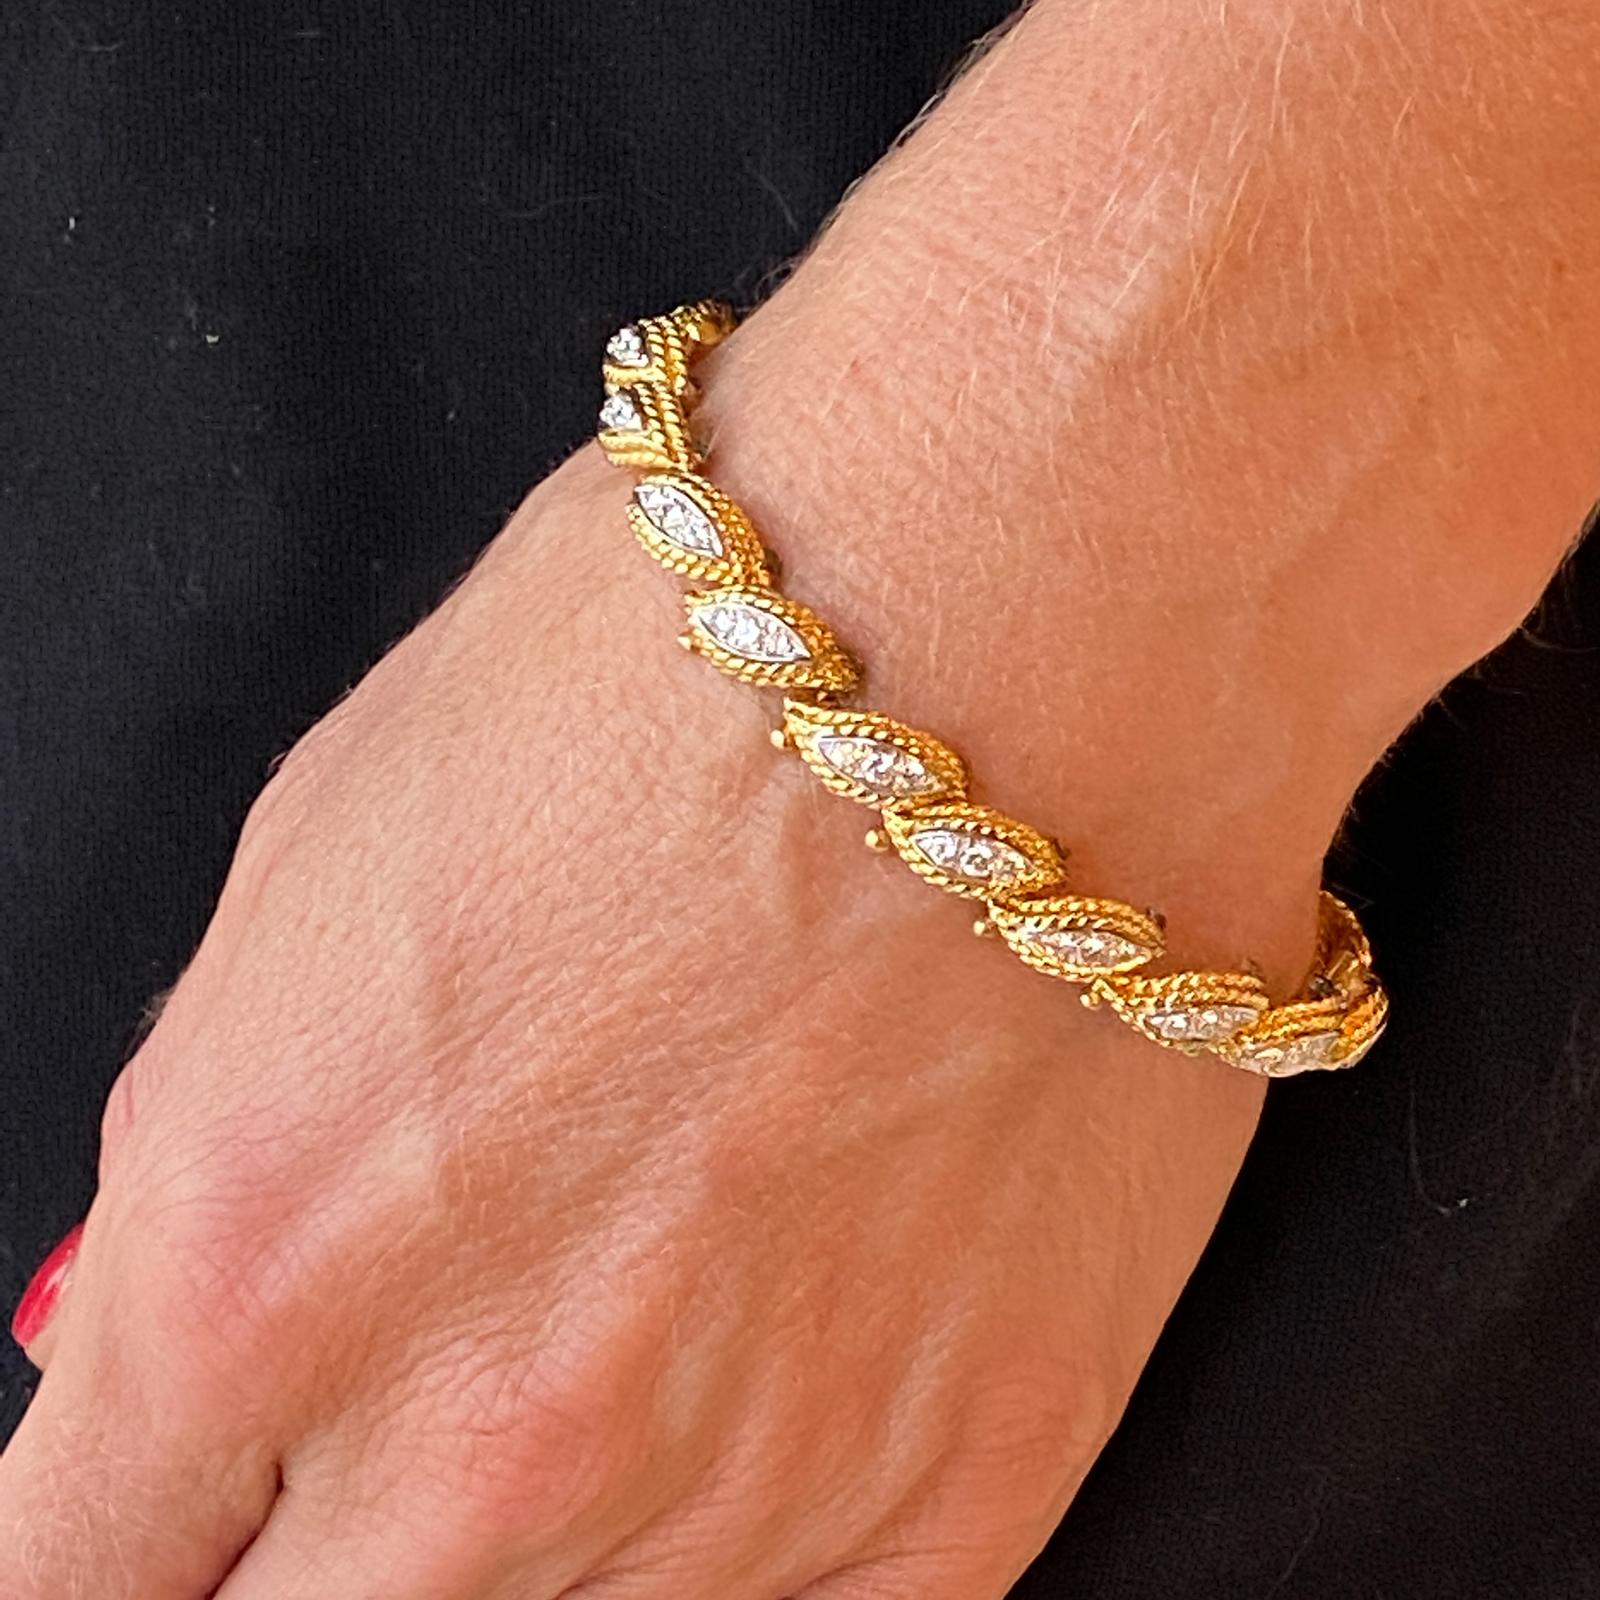 Vintage 18 karat two-tone diamond bracelet.  The bracelet features a rope design link each set with round brilliant cut diamonds.  There is a total of 54 round brilliant cut diamonds weighing approximately 1.62 carats total diamond weight.  Overall